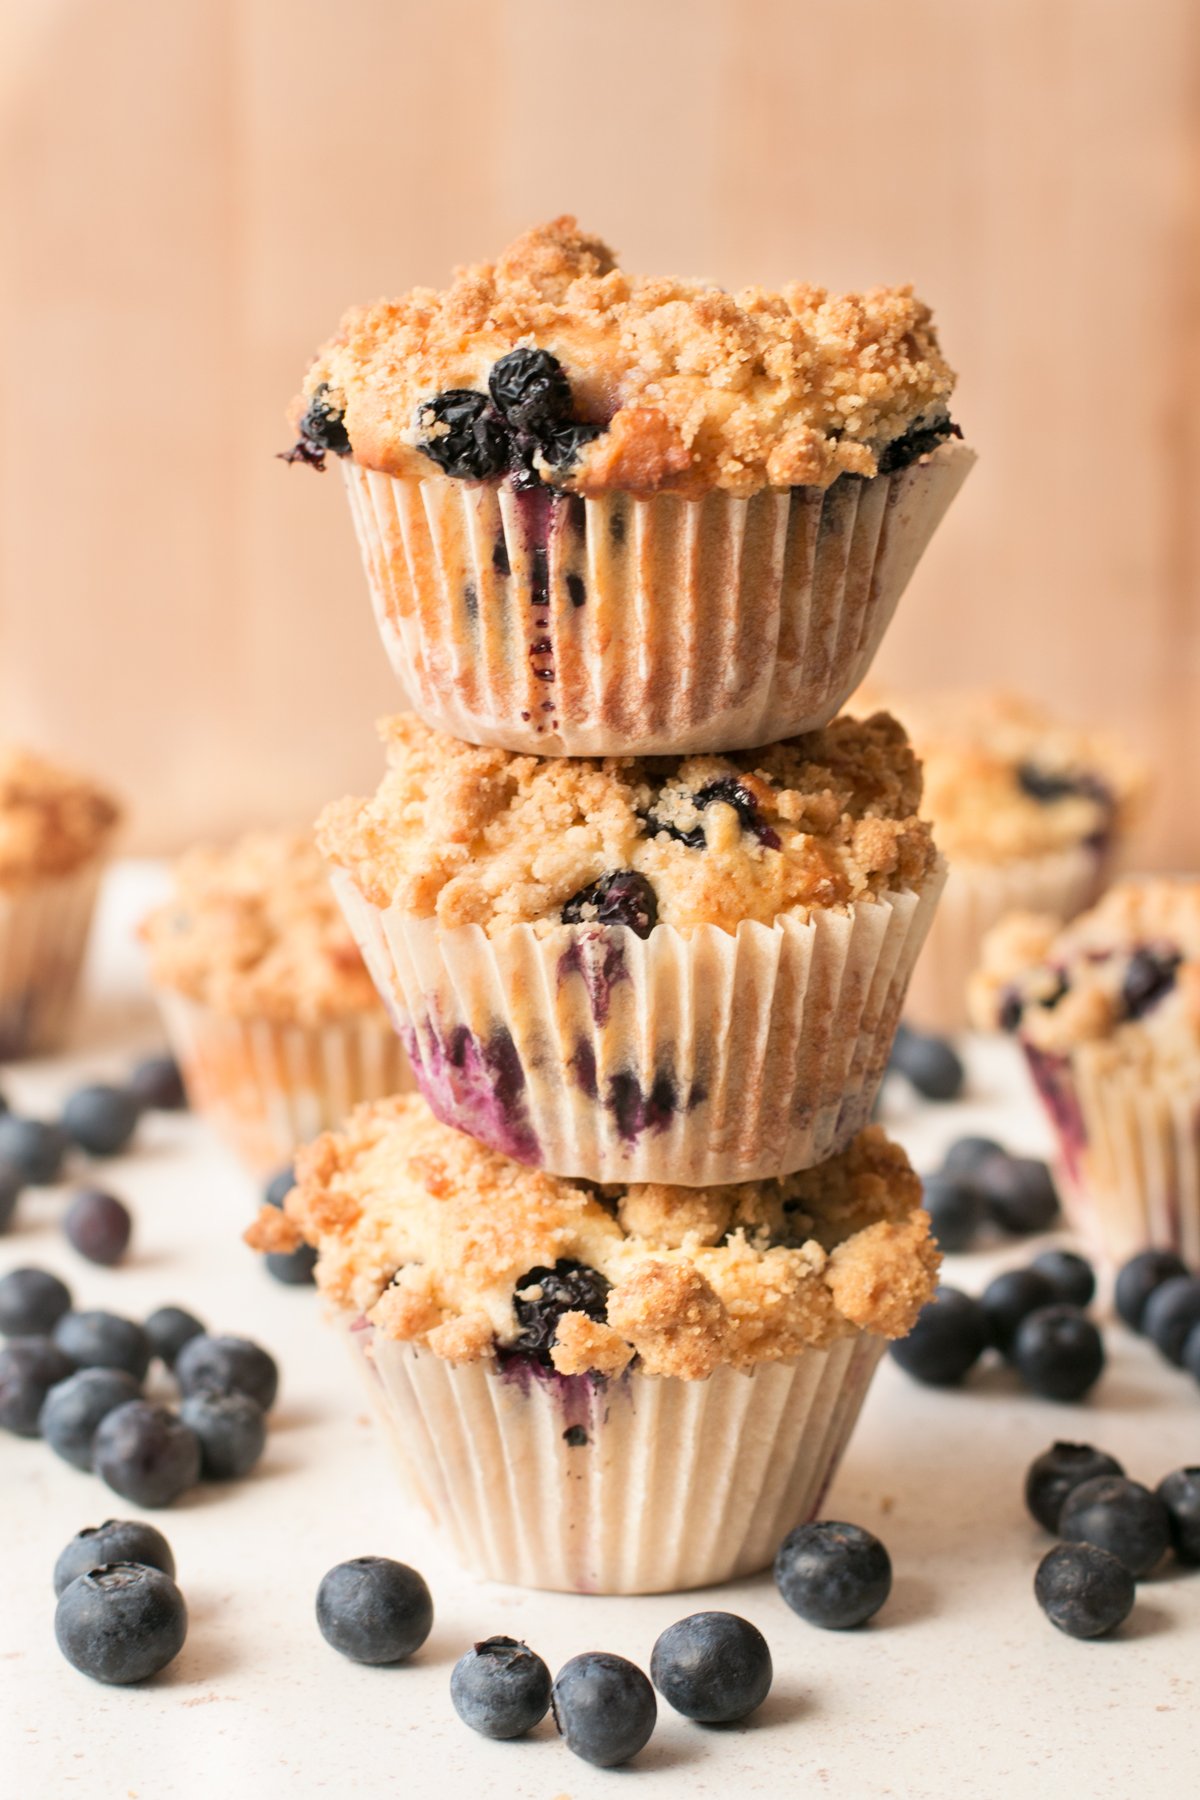 A stack of blueberry crumb muffins sitting on a white surface and surrounded by loose blueberries